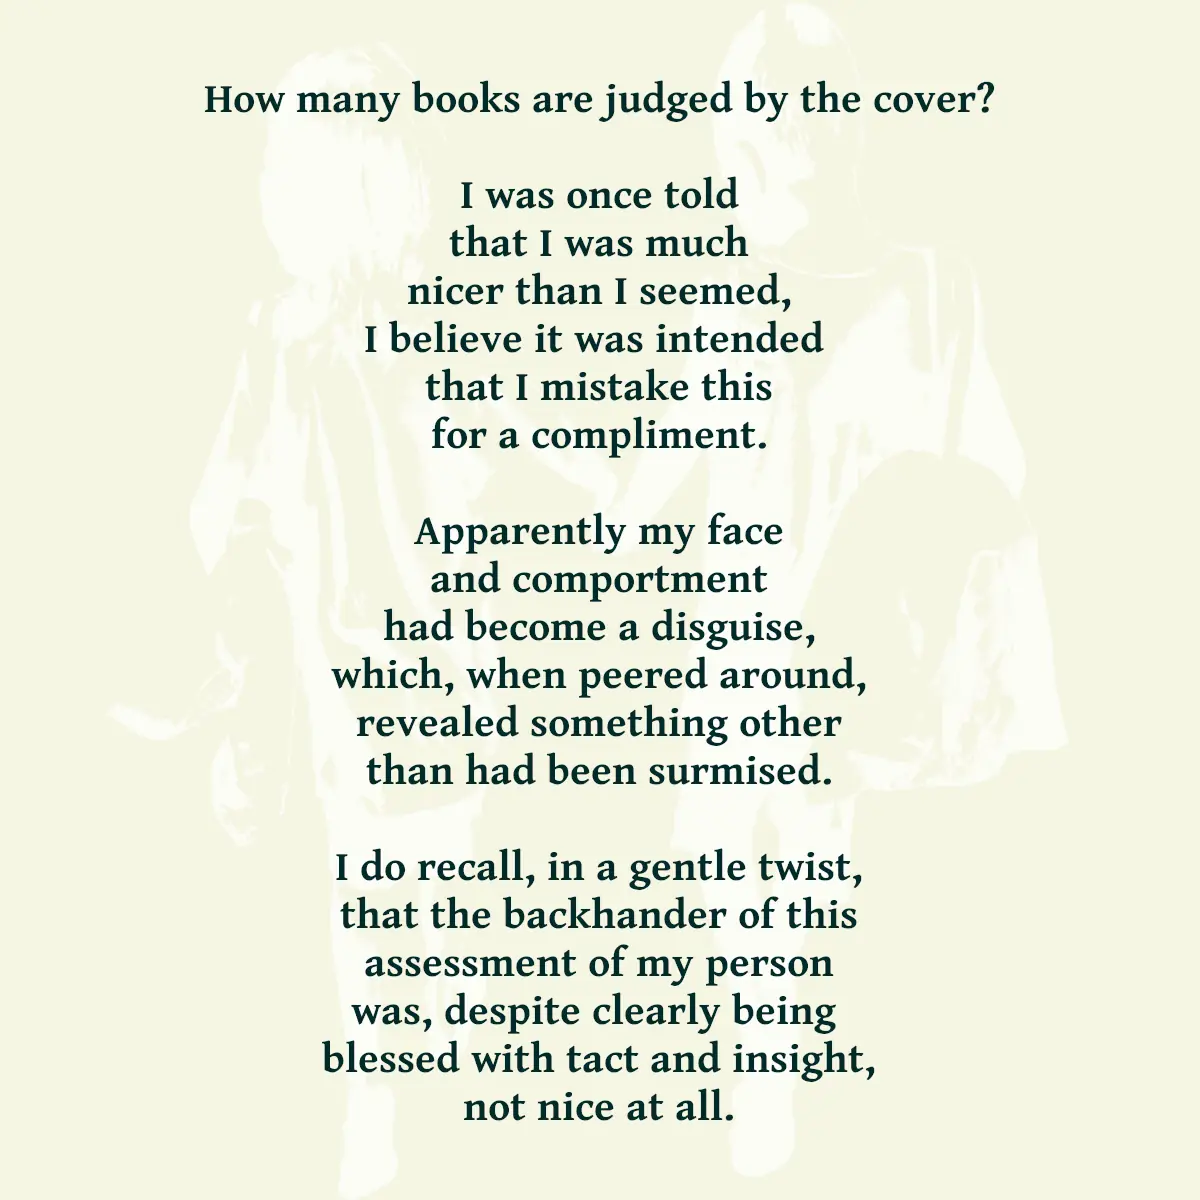 How many books are judged by the cover? I was once told that I was much nicer than I seemed, I believe it was intended that I mistake this for a compliment. Apparently my face and comportment had become a disguise, which, when peered around, revealed something other than had been surmised. I do recall, in a gentle twist, that the backhander of this assessment of my person was, despite clearly being blessed with tact and insight, not nice at all.